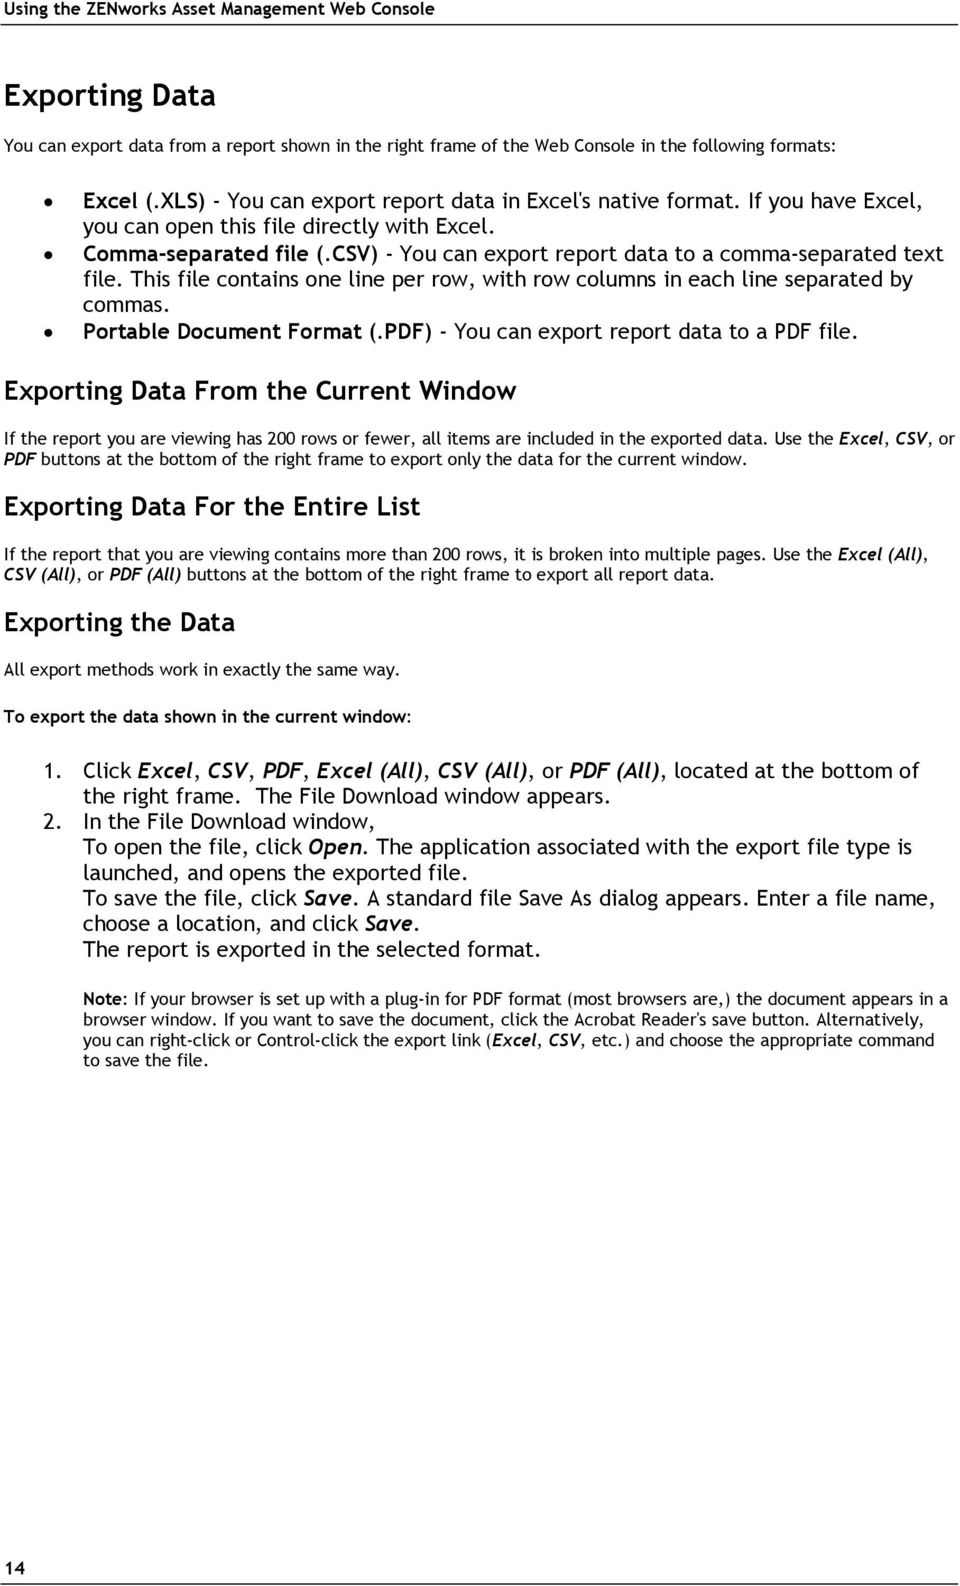 CSV) - You can export report data to a comma-separated text file. This file contains one line per row, with row columns in each line separated by commas. Portable Document Format (.